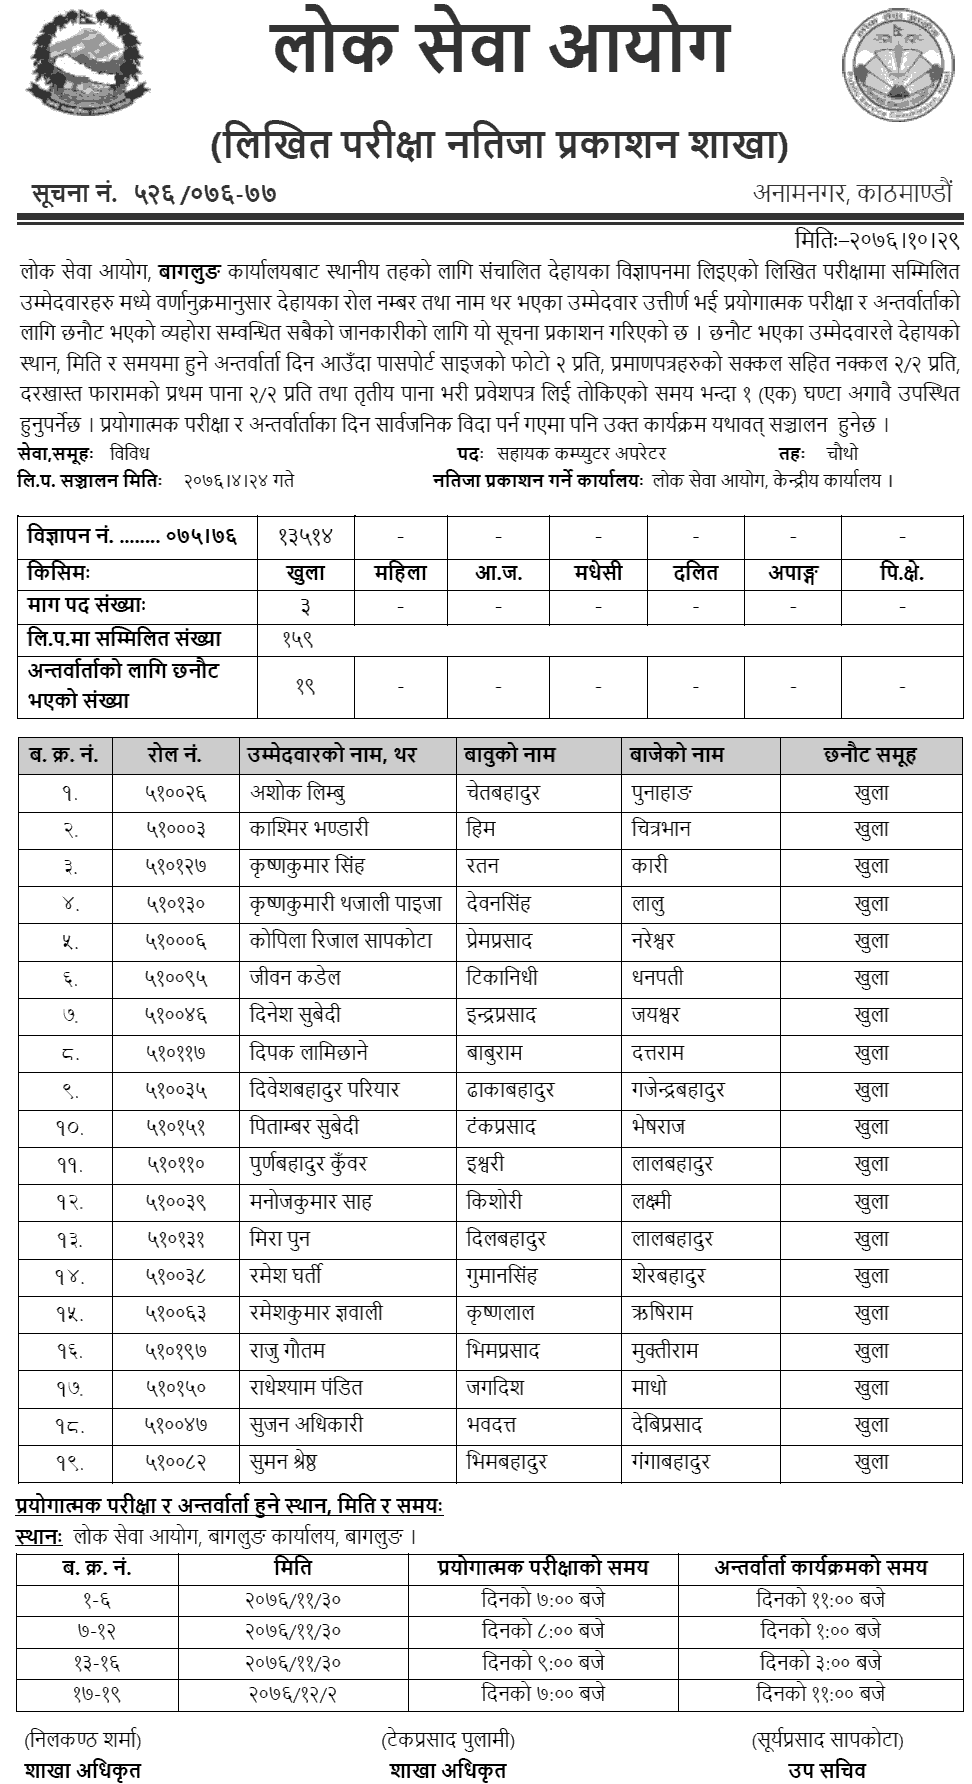 Lok Sewa Aayog Baglung Local Level 4th Assistant Computer Operator Written Exam Result